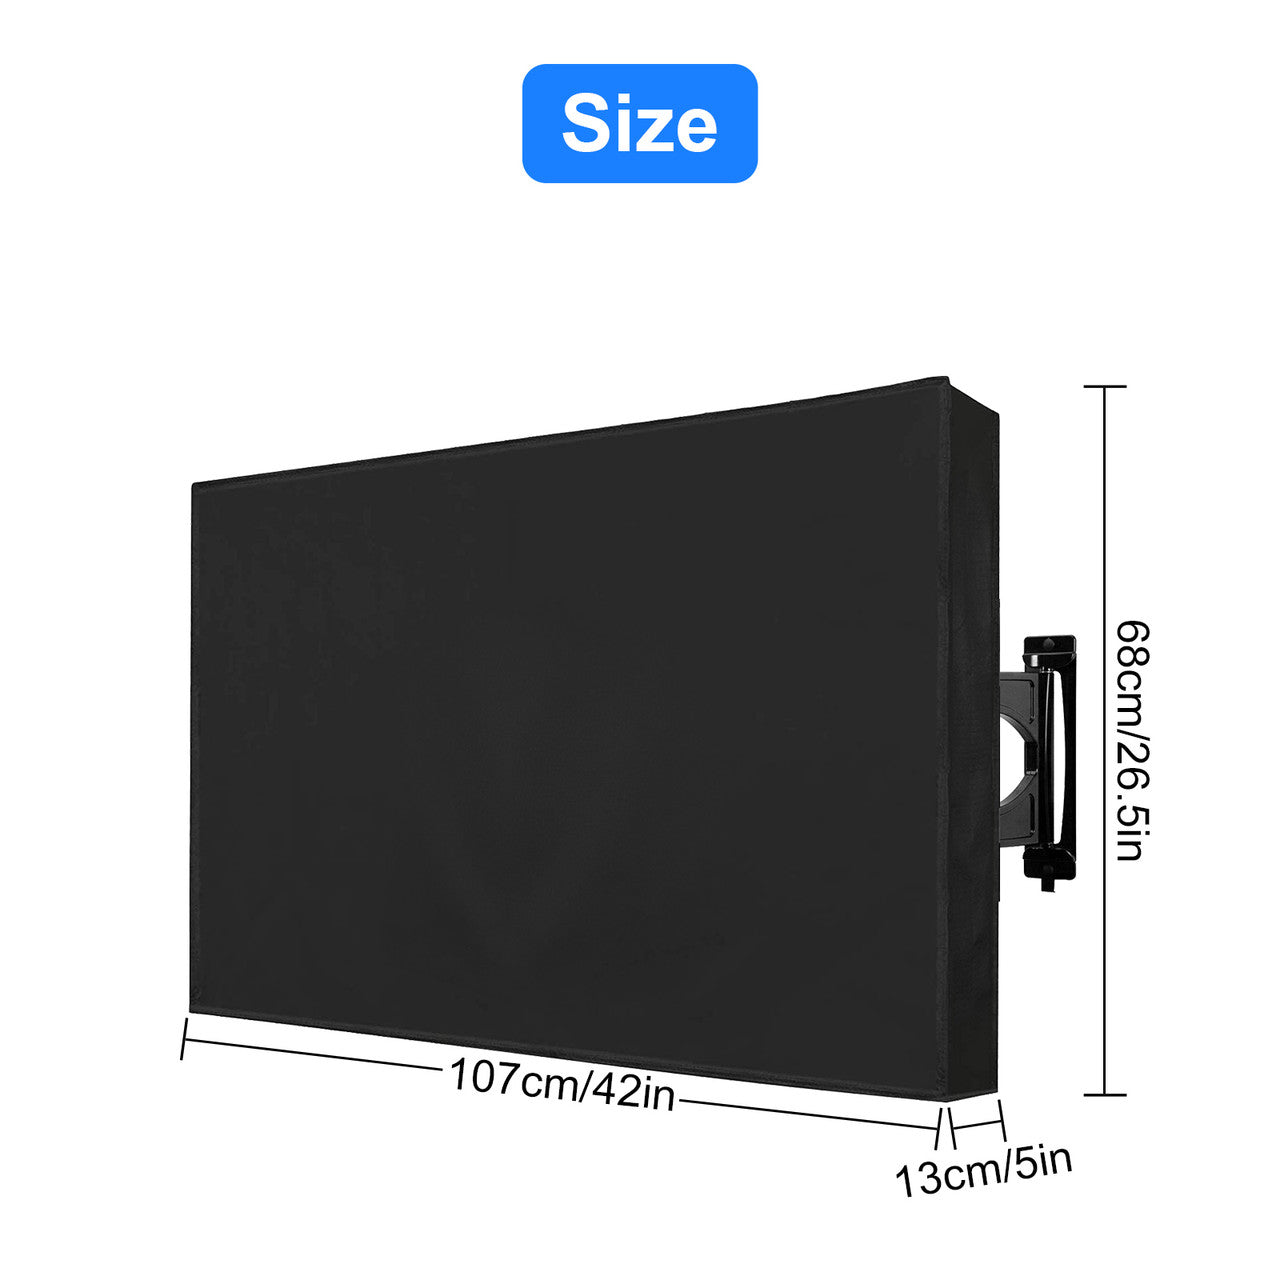 Outdoor TV Cover Weatherproof for 40-42 inch TV, Waterproof and Dustproof TV Screen Protectors for Outside LED, LCD, OLED Flat Screen TVs